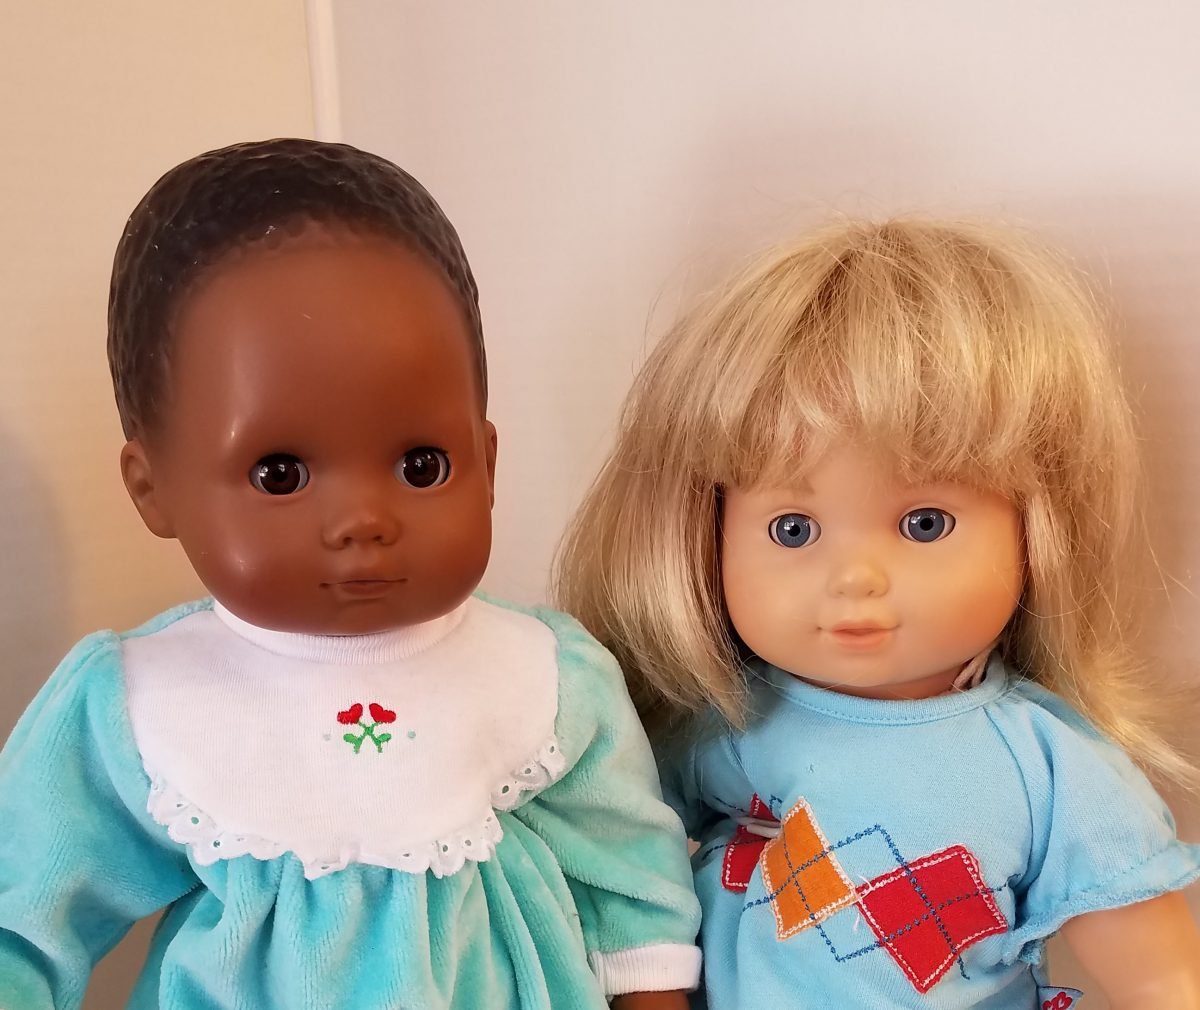 american girl bitty twins clothes